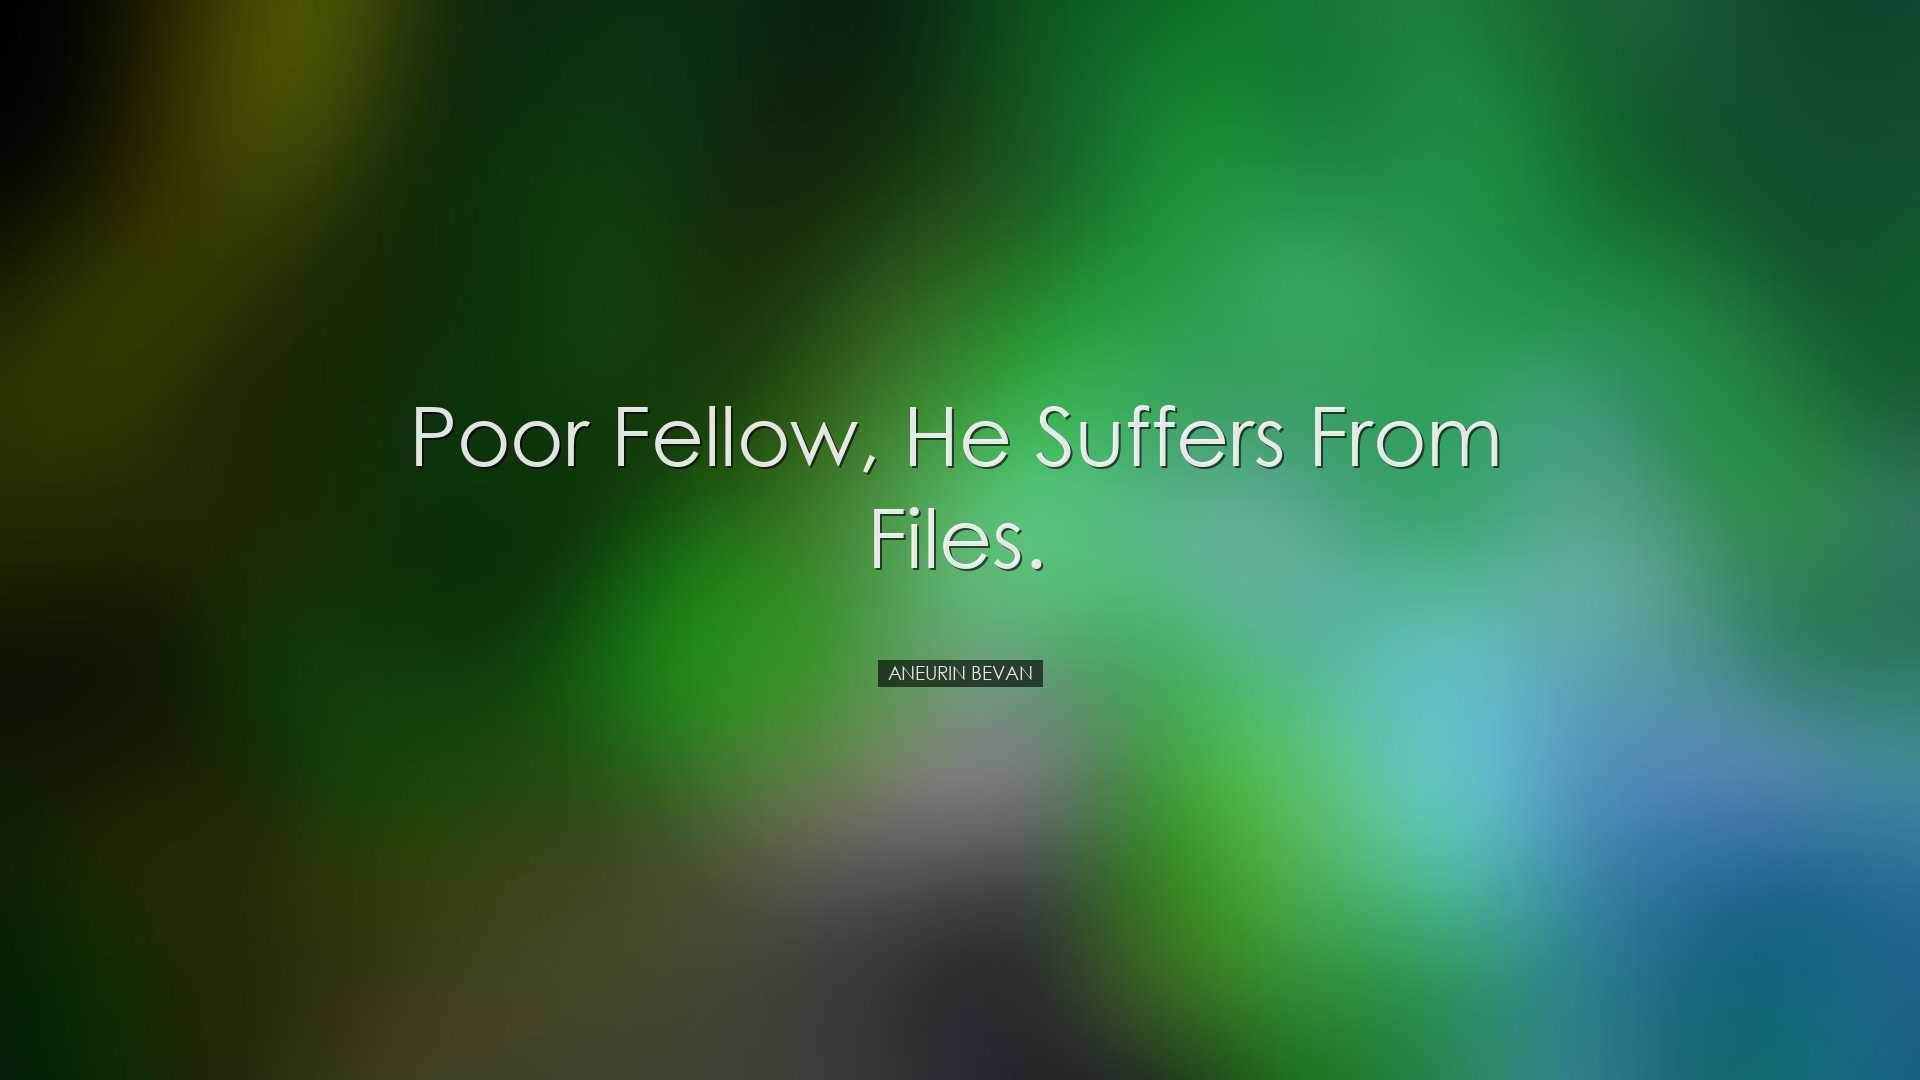 Poor fellow, he suffers from files. - Aneurin Bevan